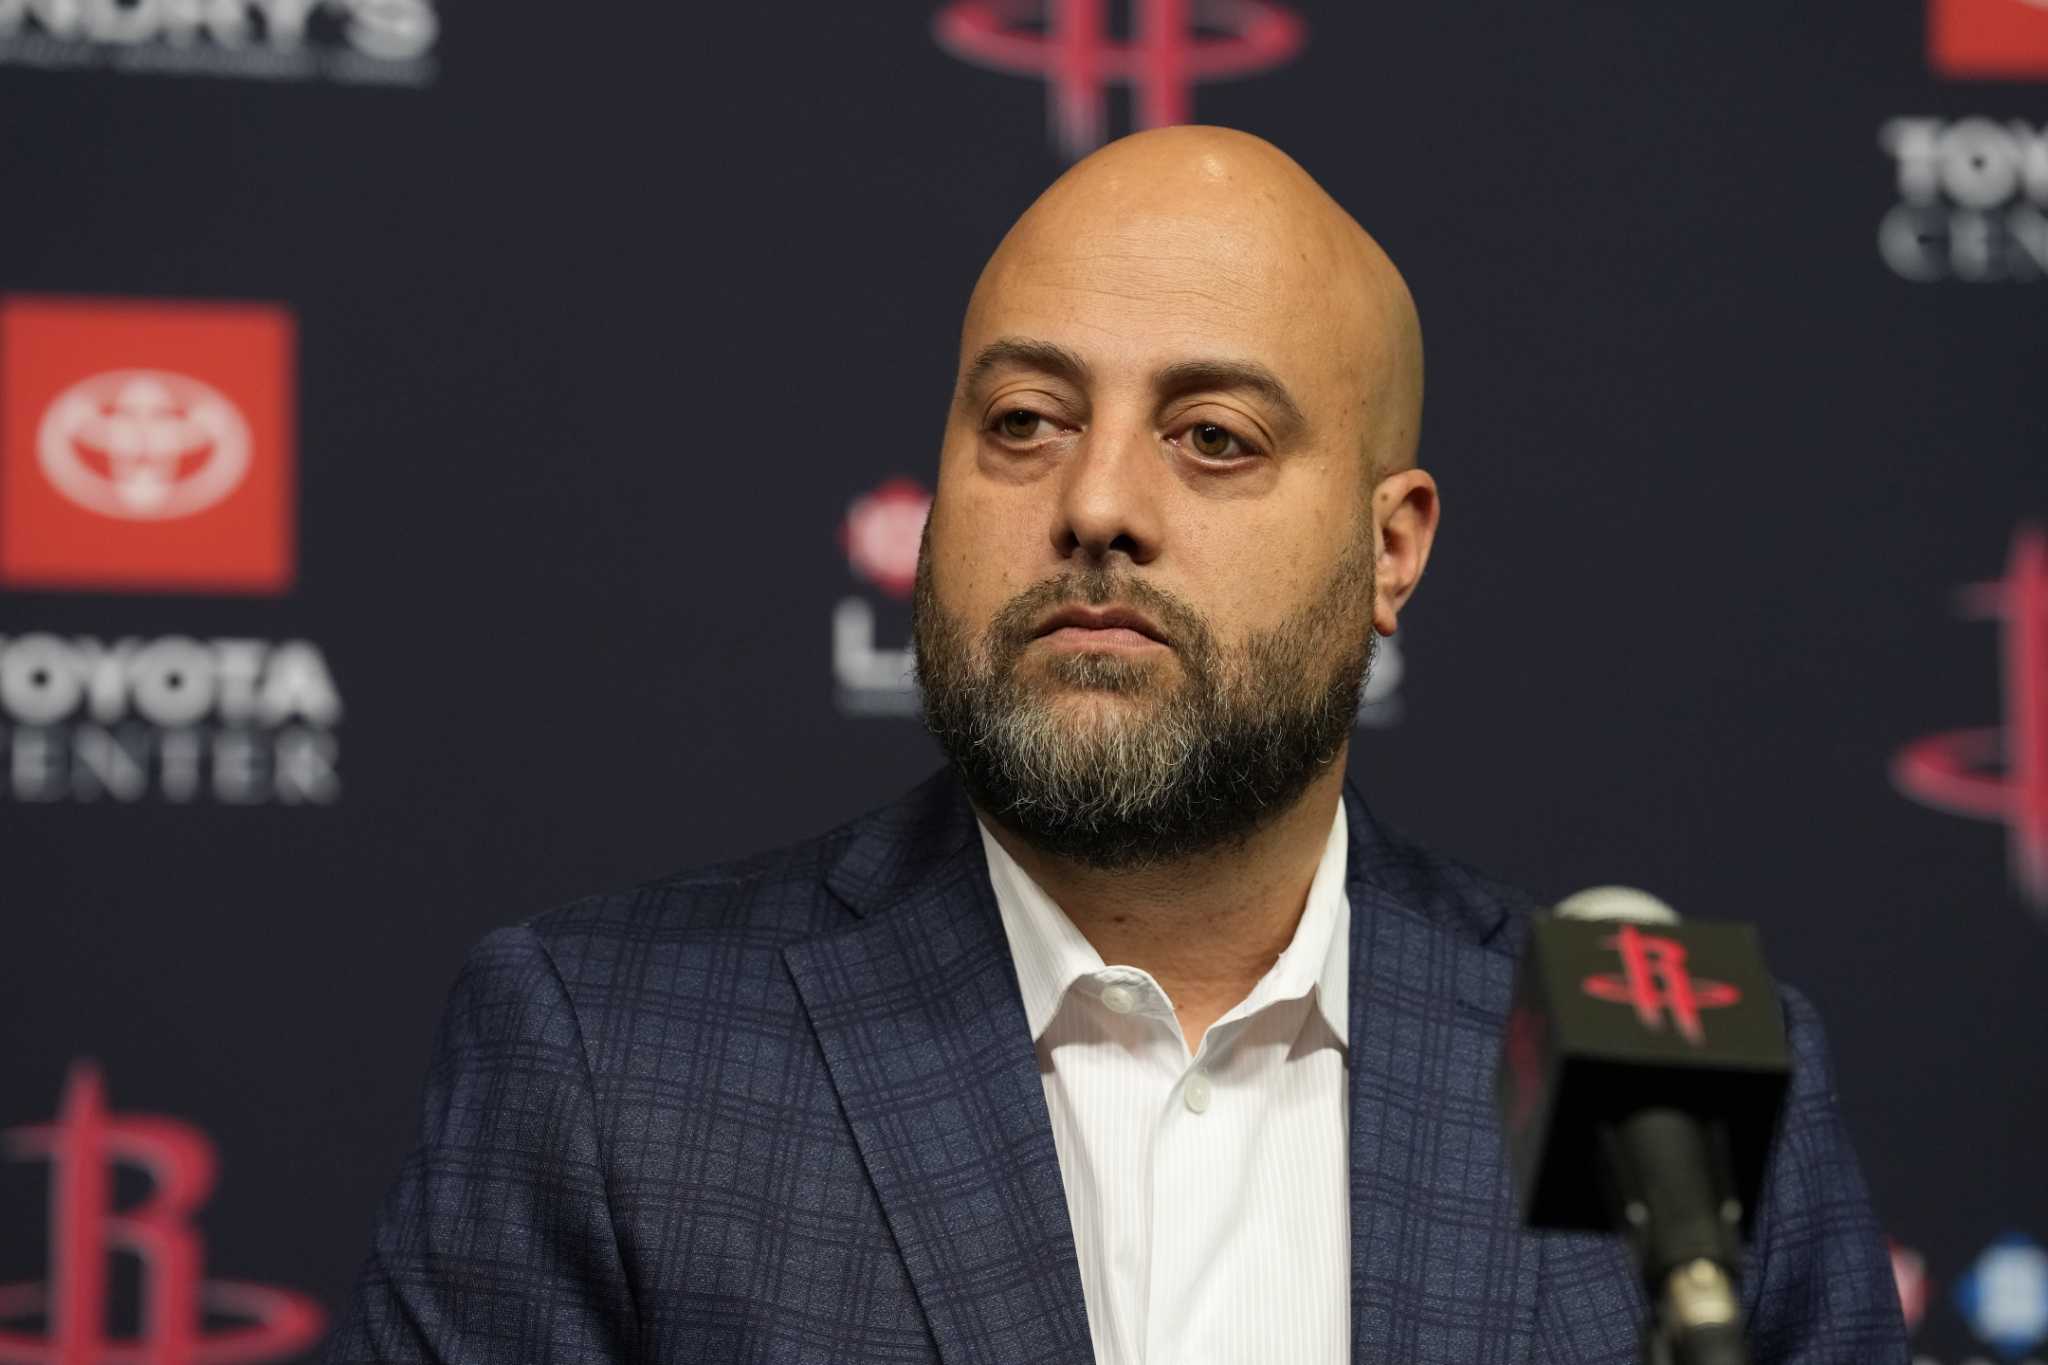 Houston Rockets: General manager Rafael Stone defends team's culture